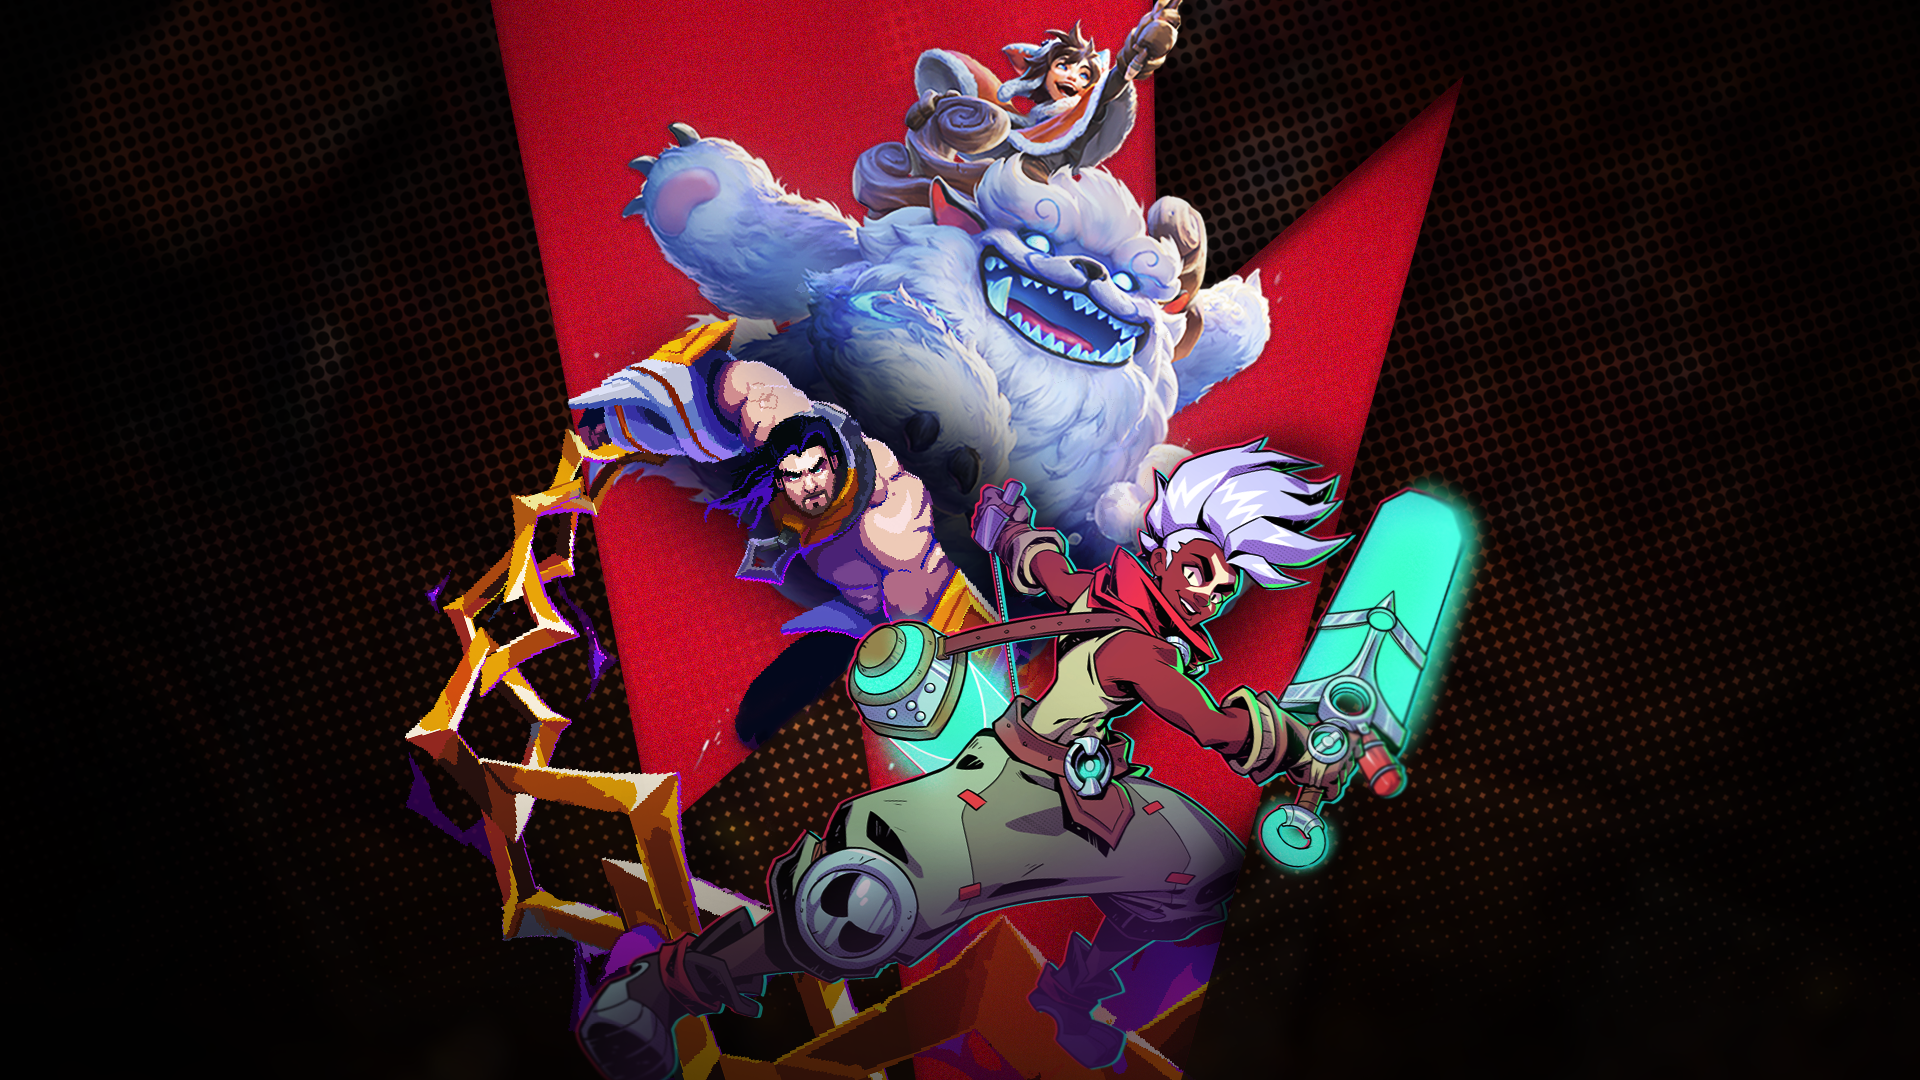 Riot Forge key art for 2023, depicting the protagonists of three upcoming titles: Nunu and Willump, a boy and his yeti; time-travelling Zaun street kid Ekko; and Sylas, the Unshackled, a mage rebel from Demacia.